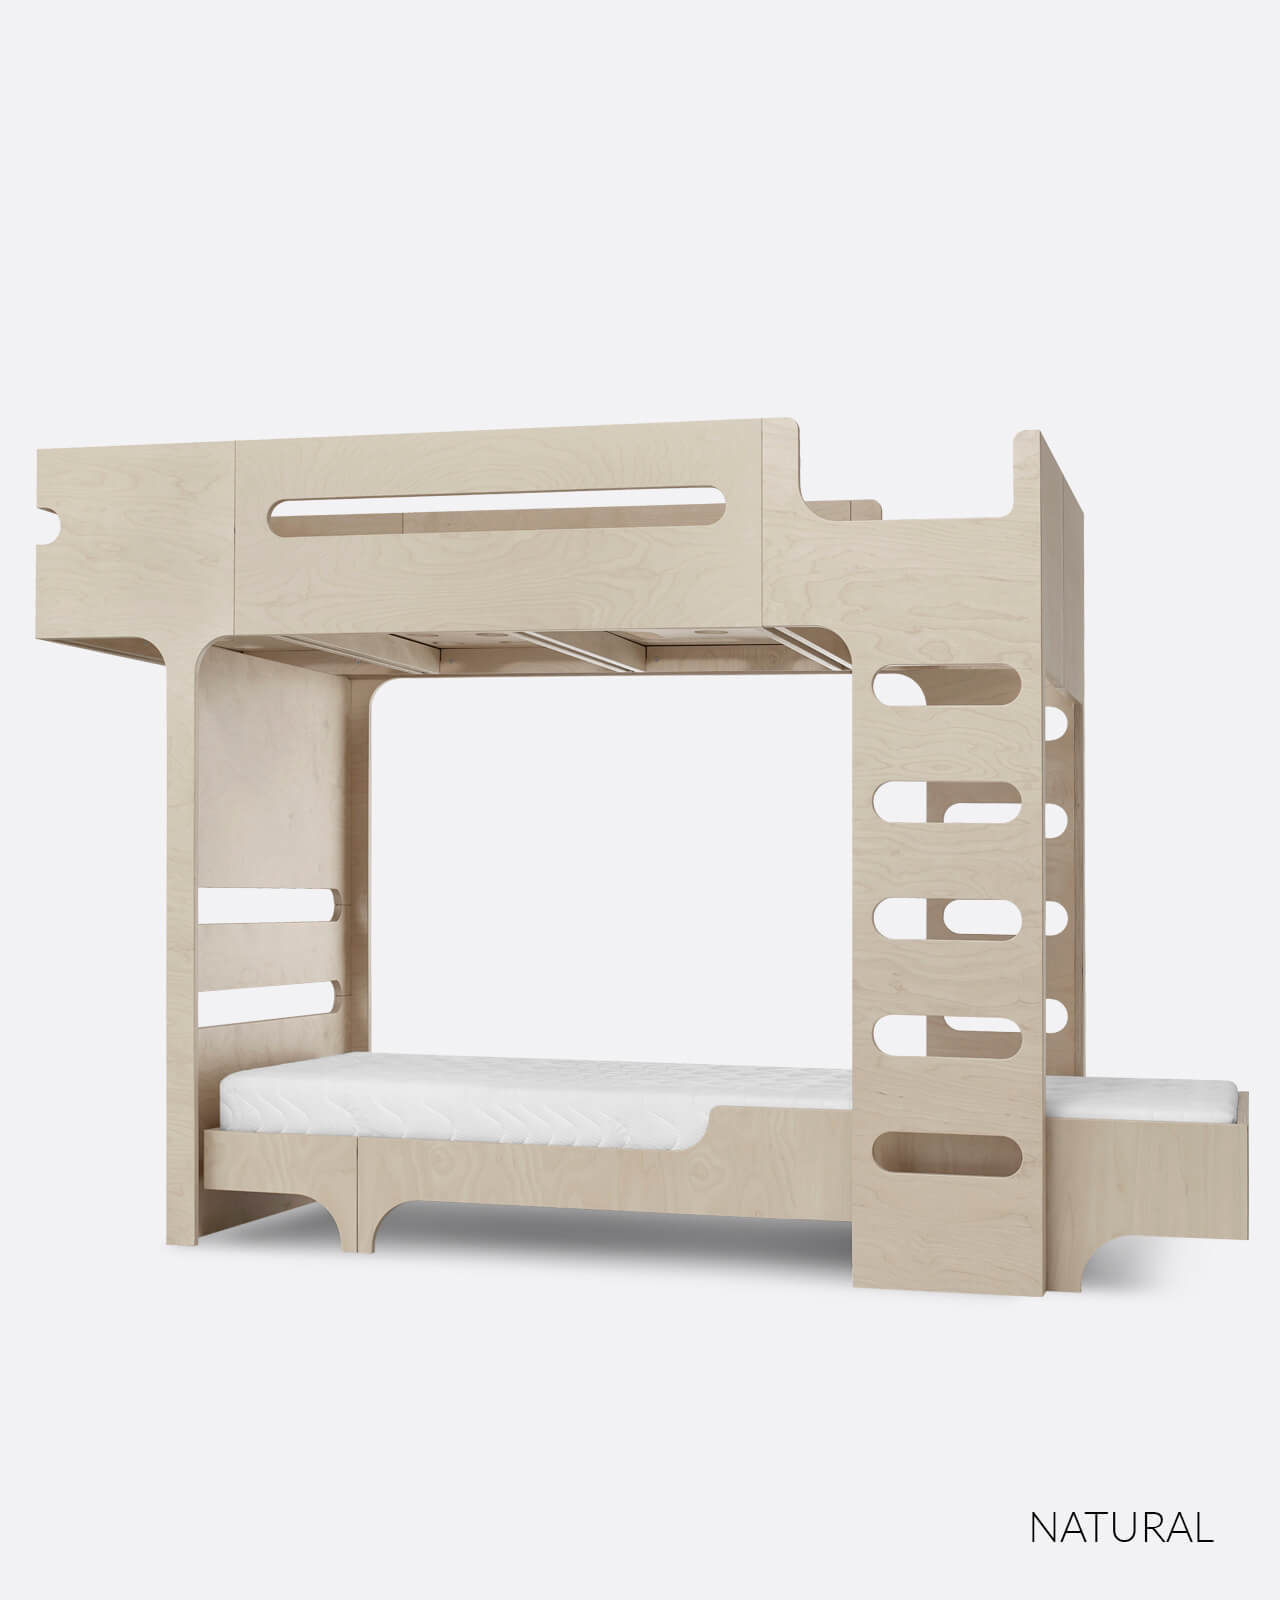 F A75 Bunk Bed For 2 Children, Wooden Bunk Bed Connectors